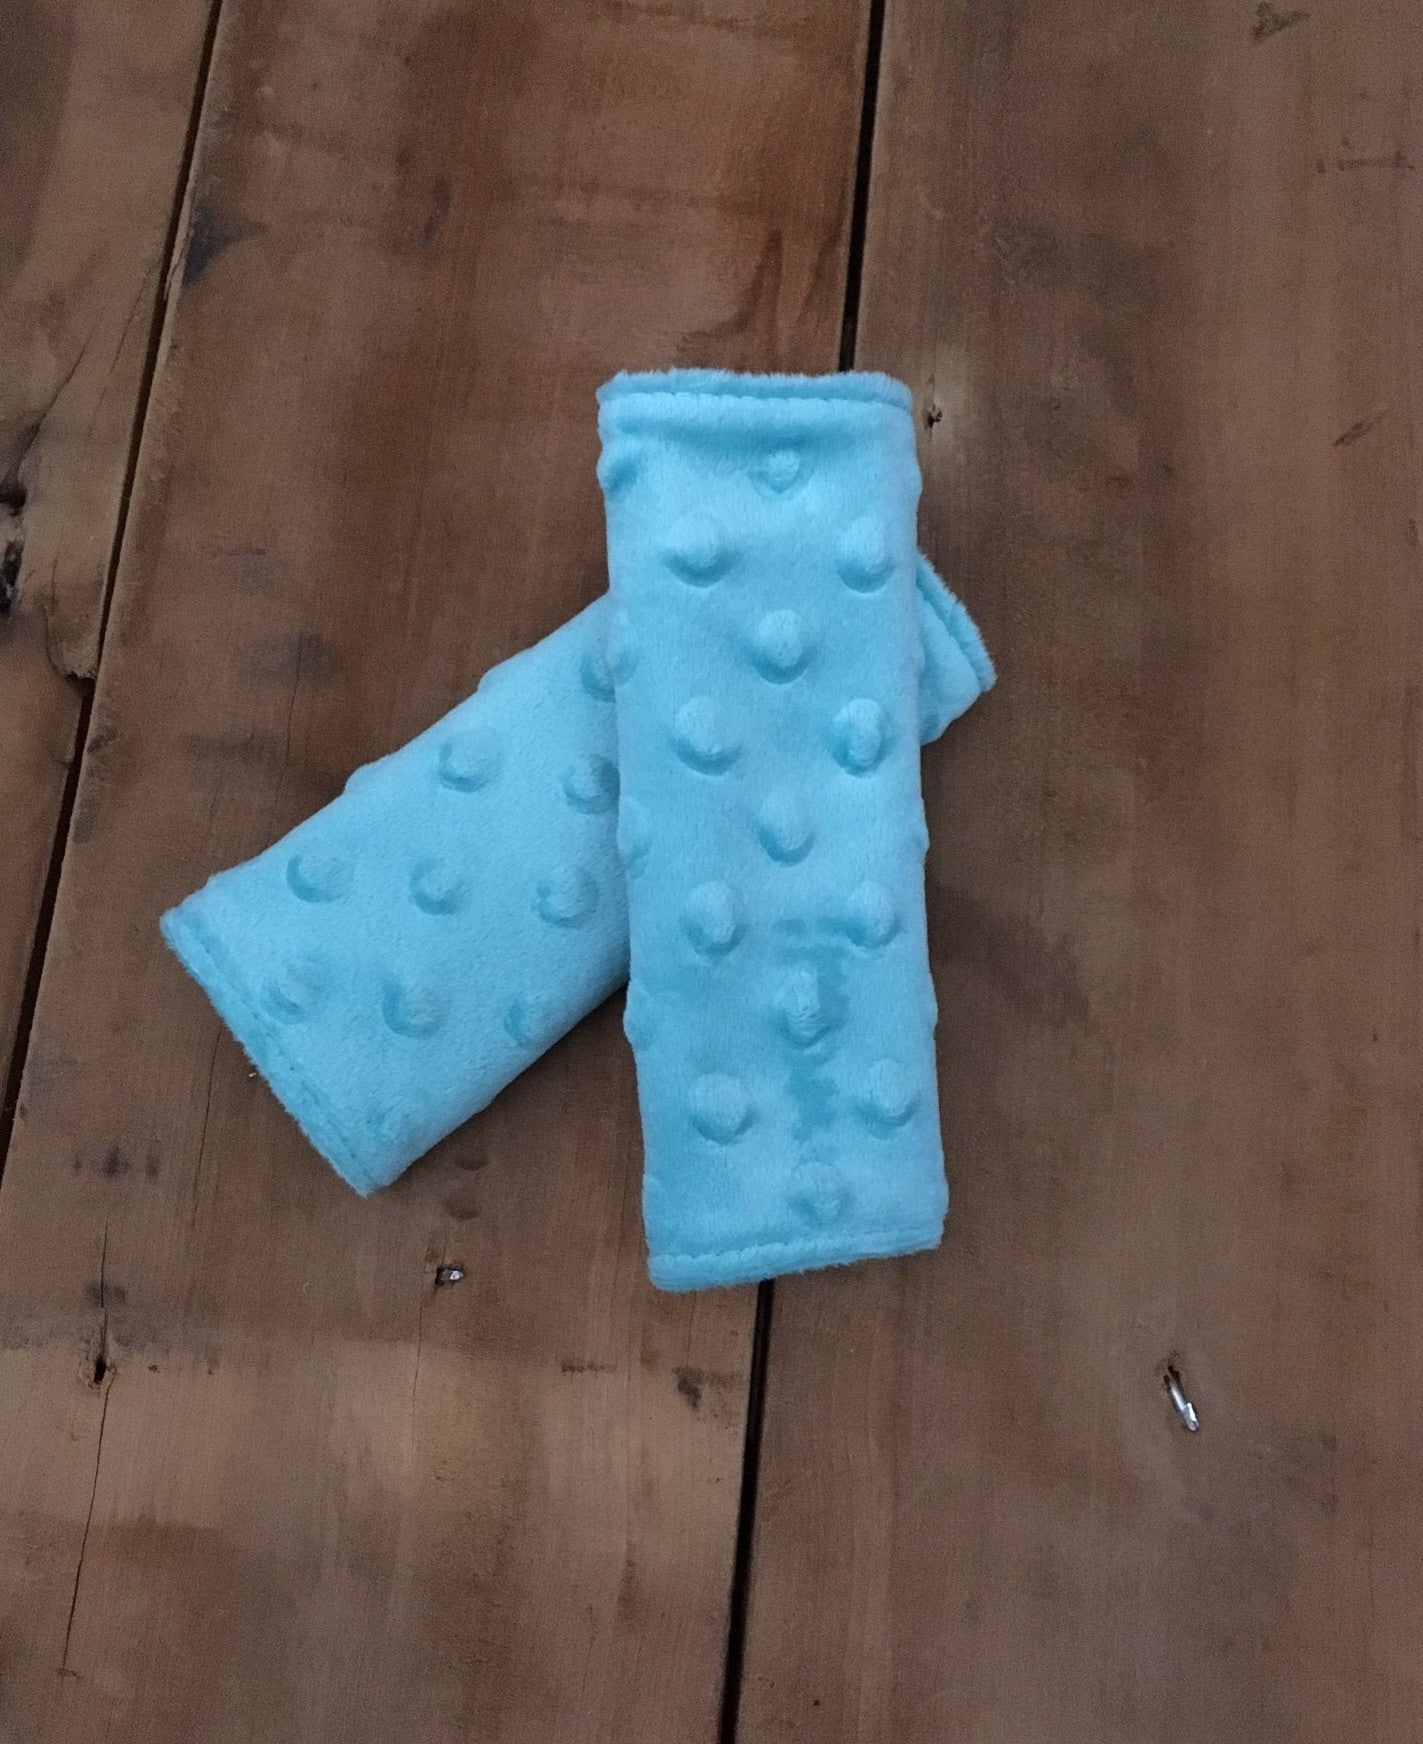 minky car seat strap covers shown in size 5" or 6" shown in aqua